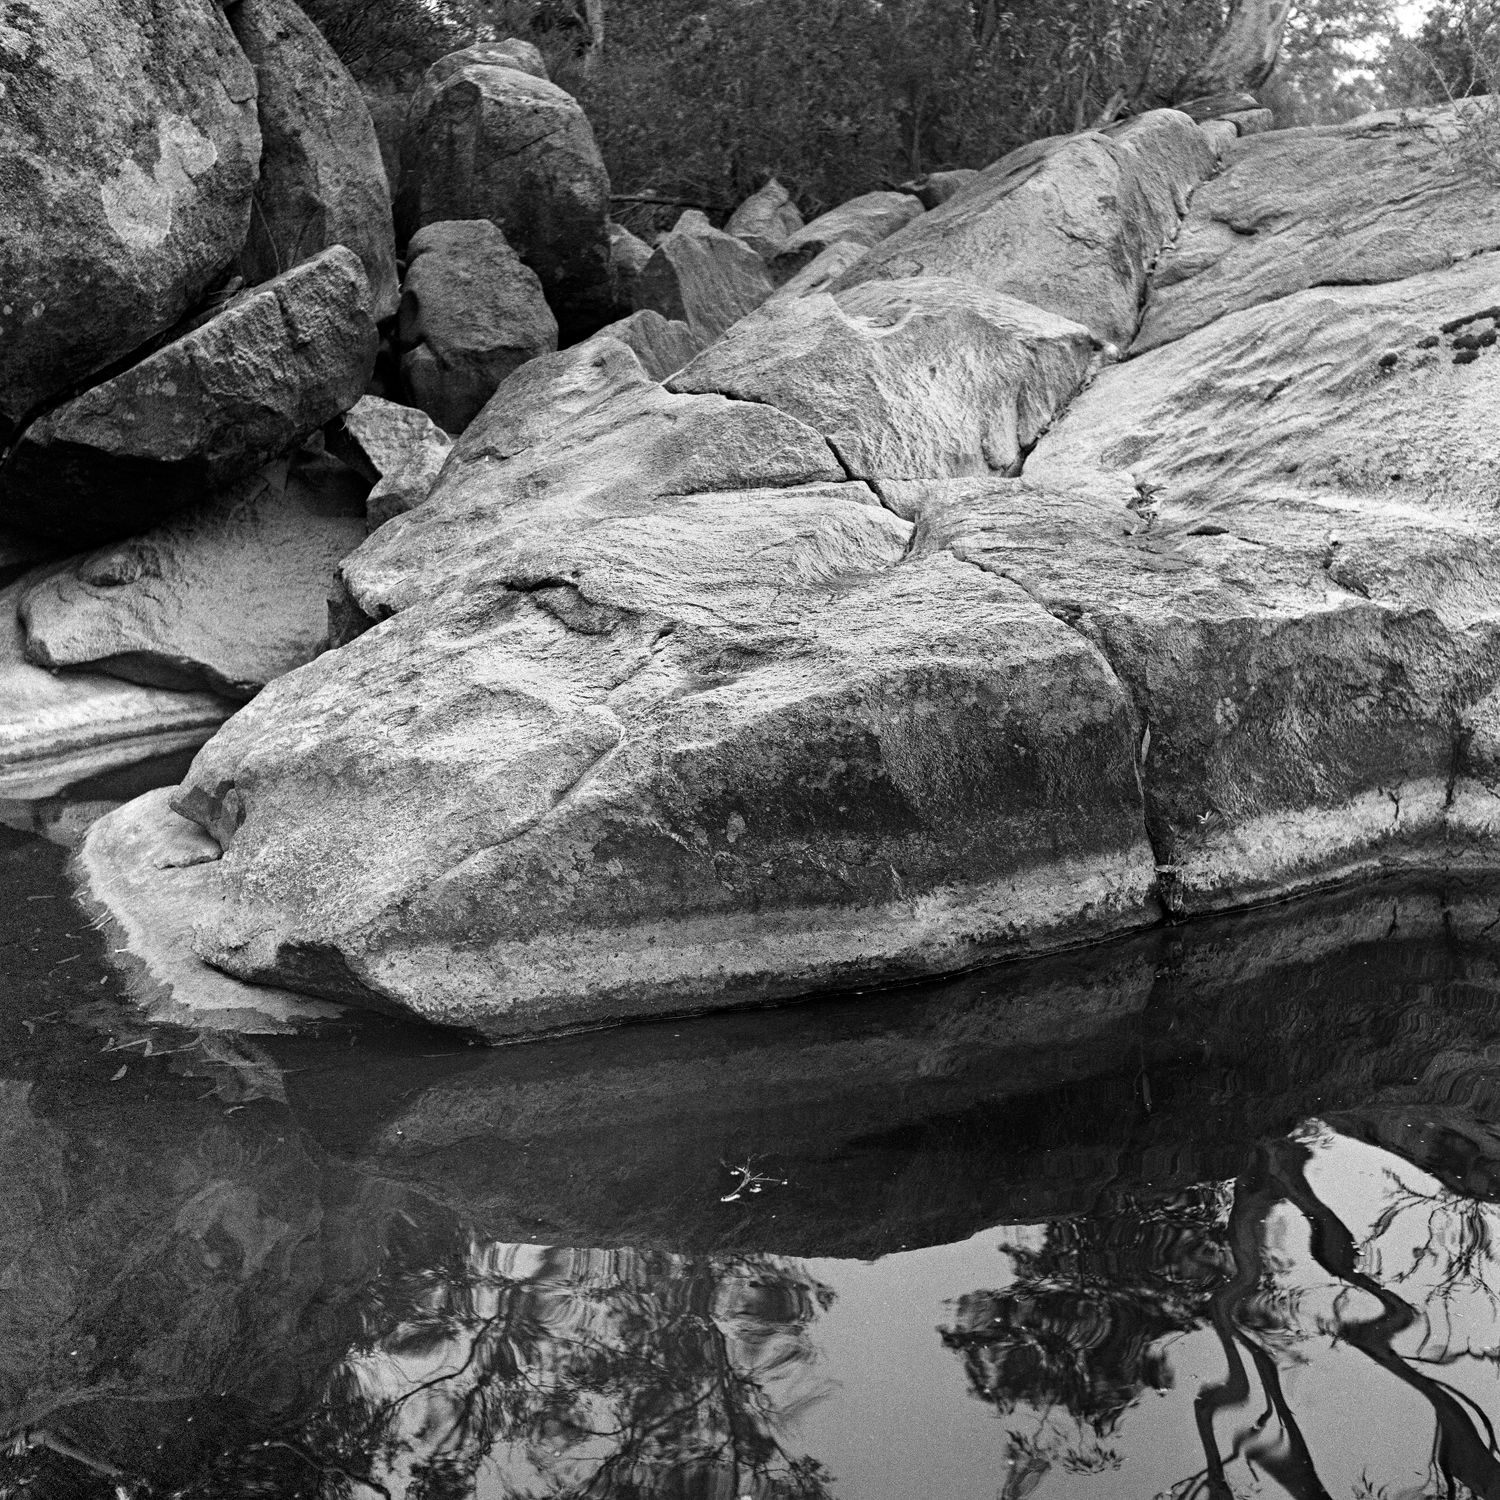 Black and white photograph depicting rock formations at a creek stream edge.